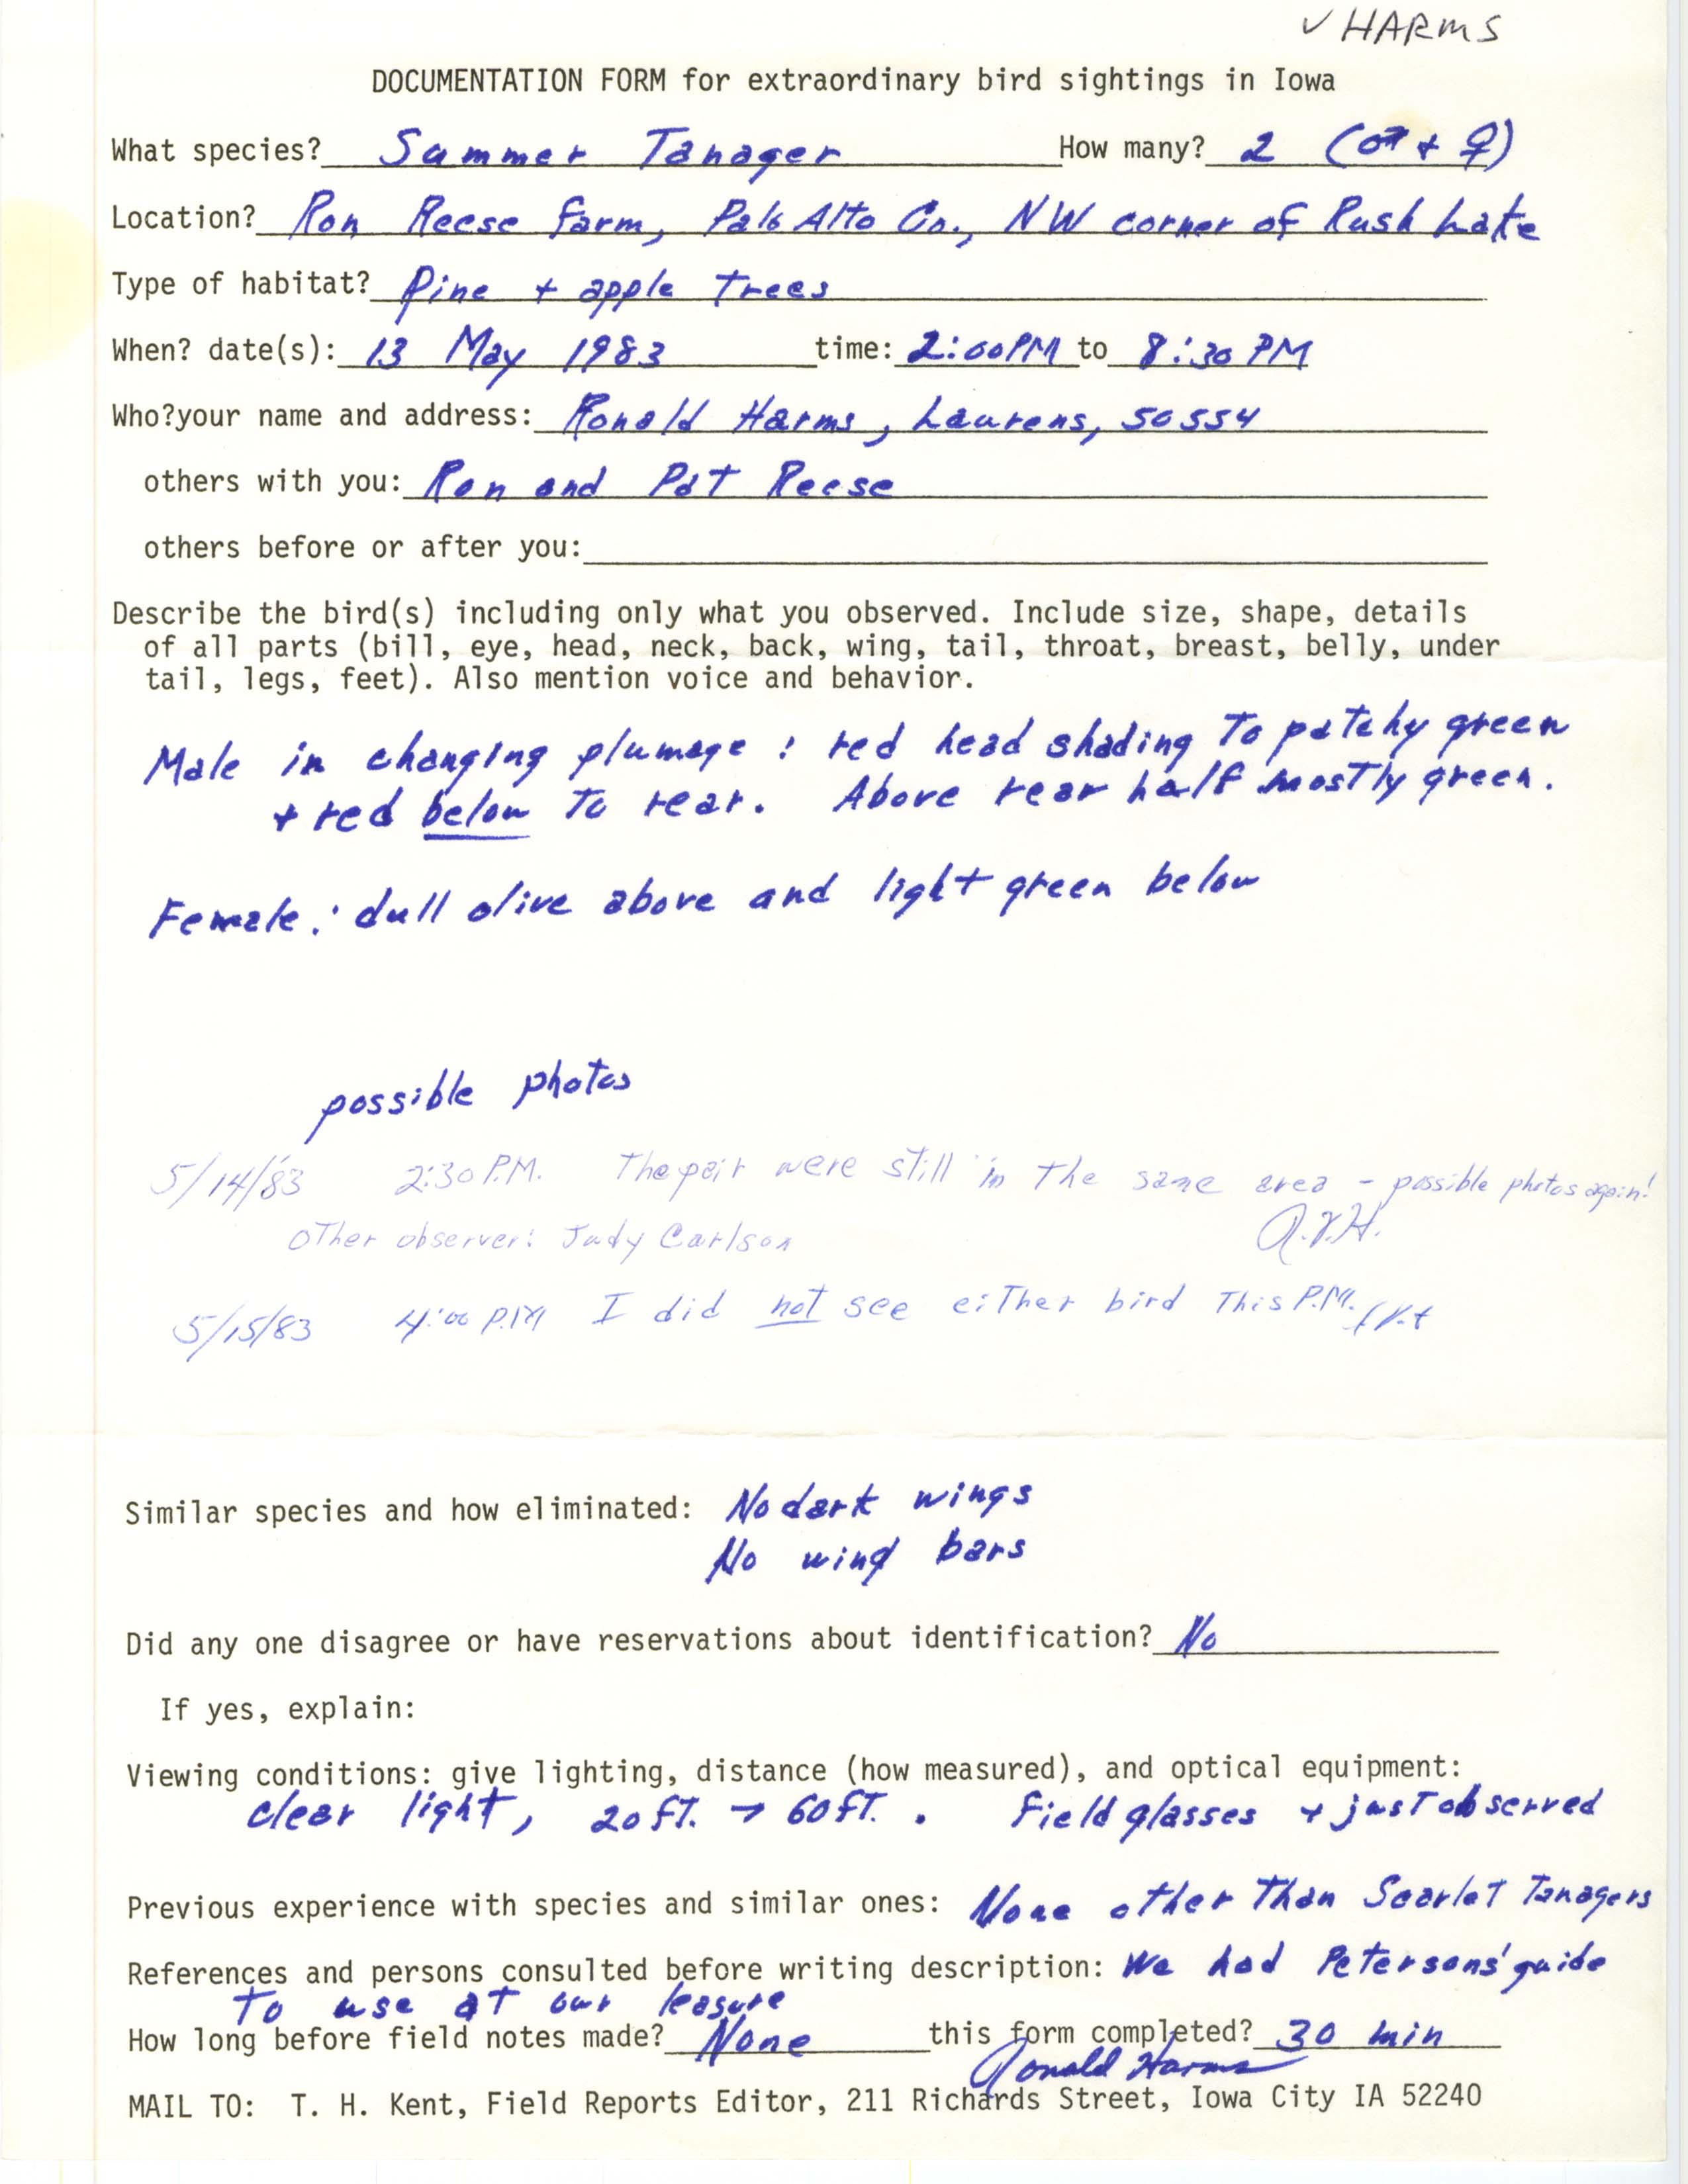 Rare bird documentation form for Summer Tanager at northwest Rush Lake in Palo Alto County, 1983